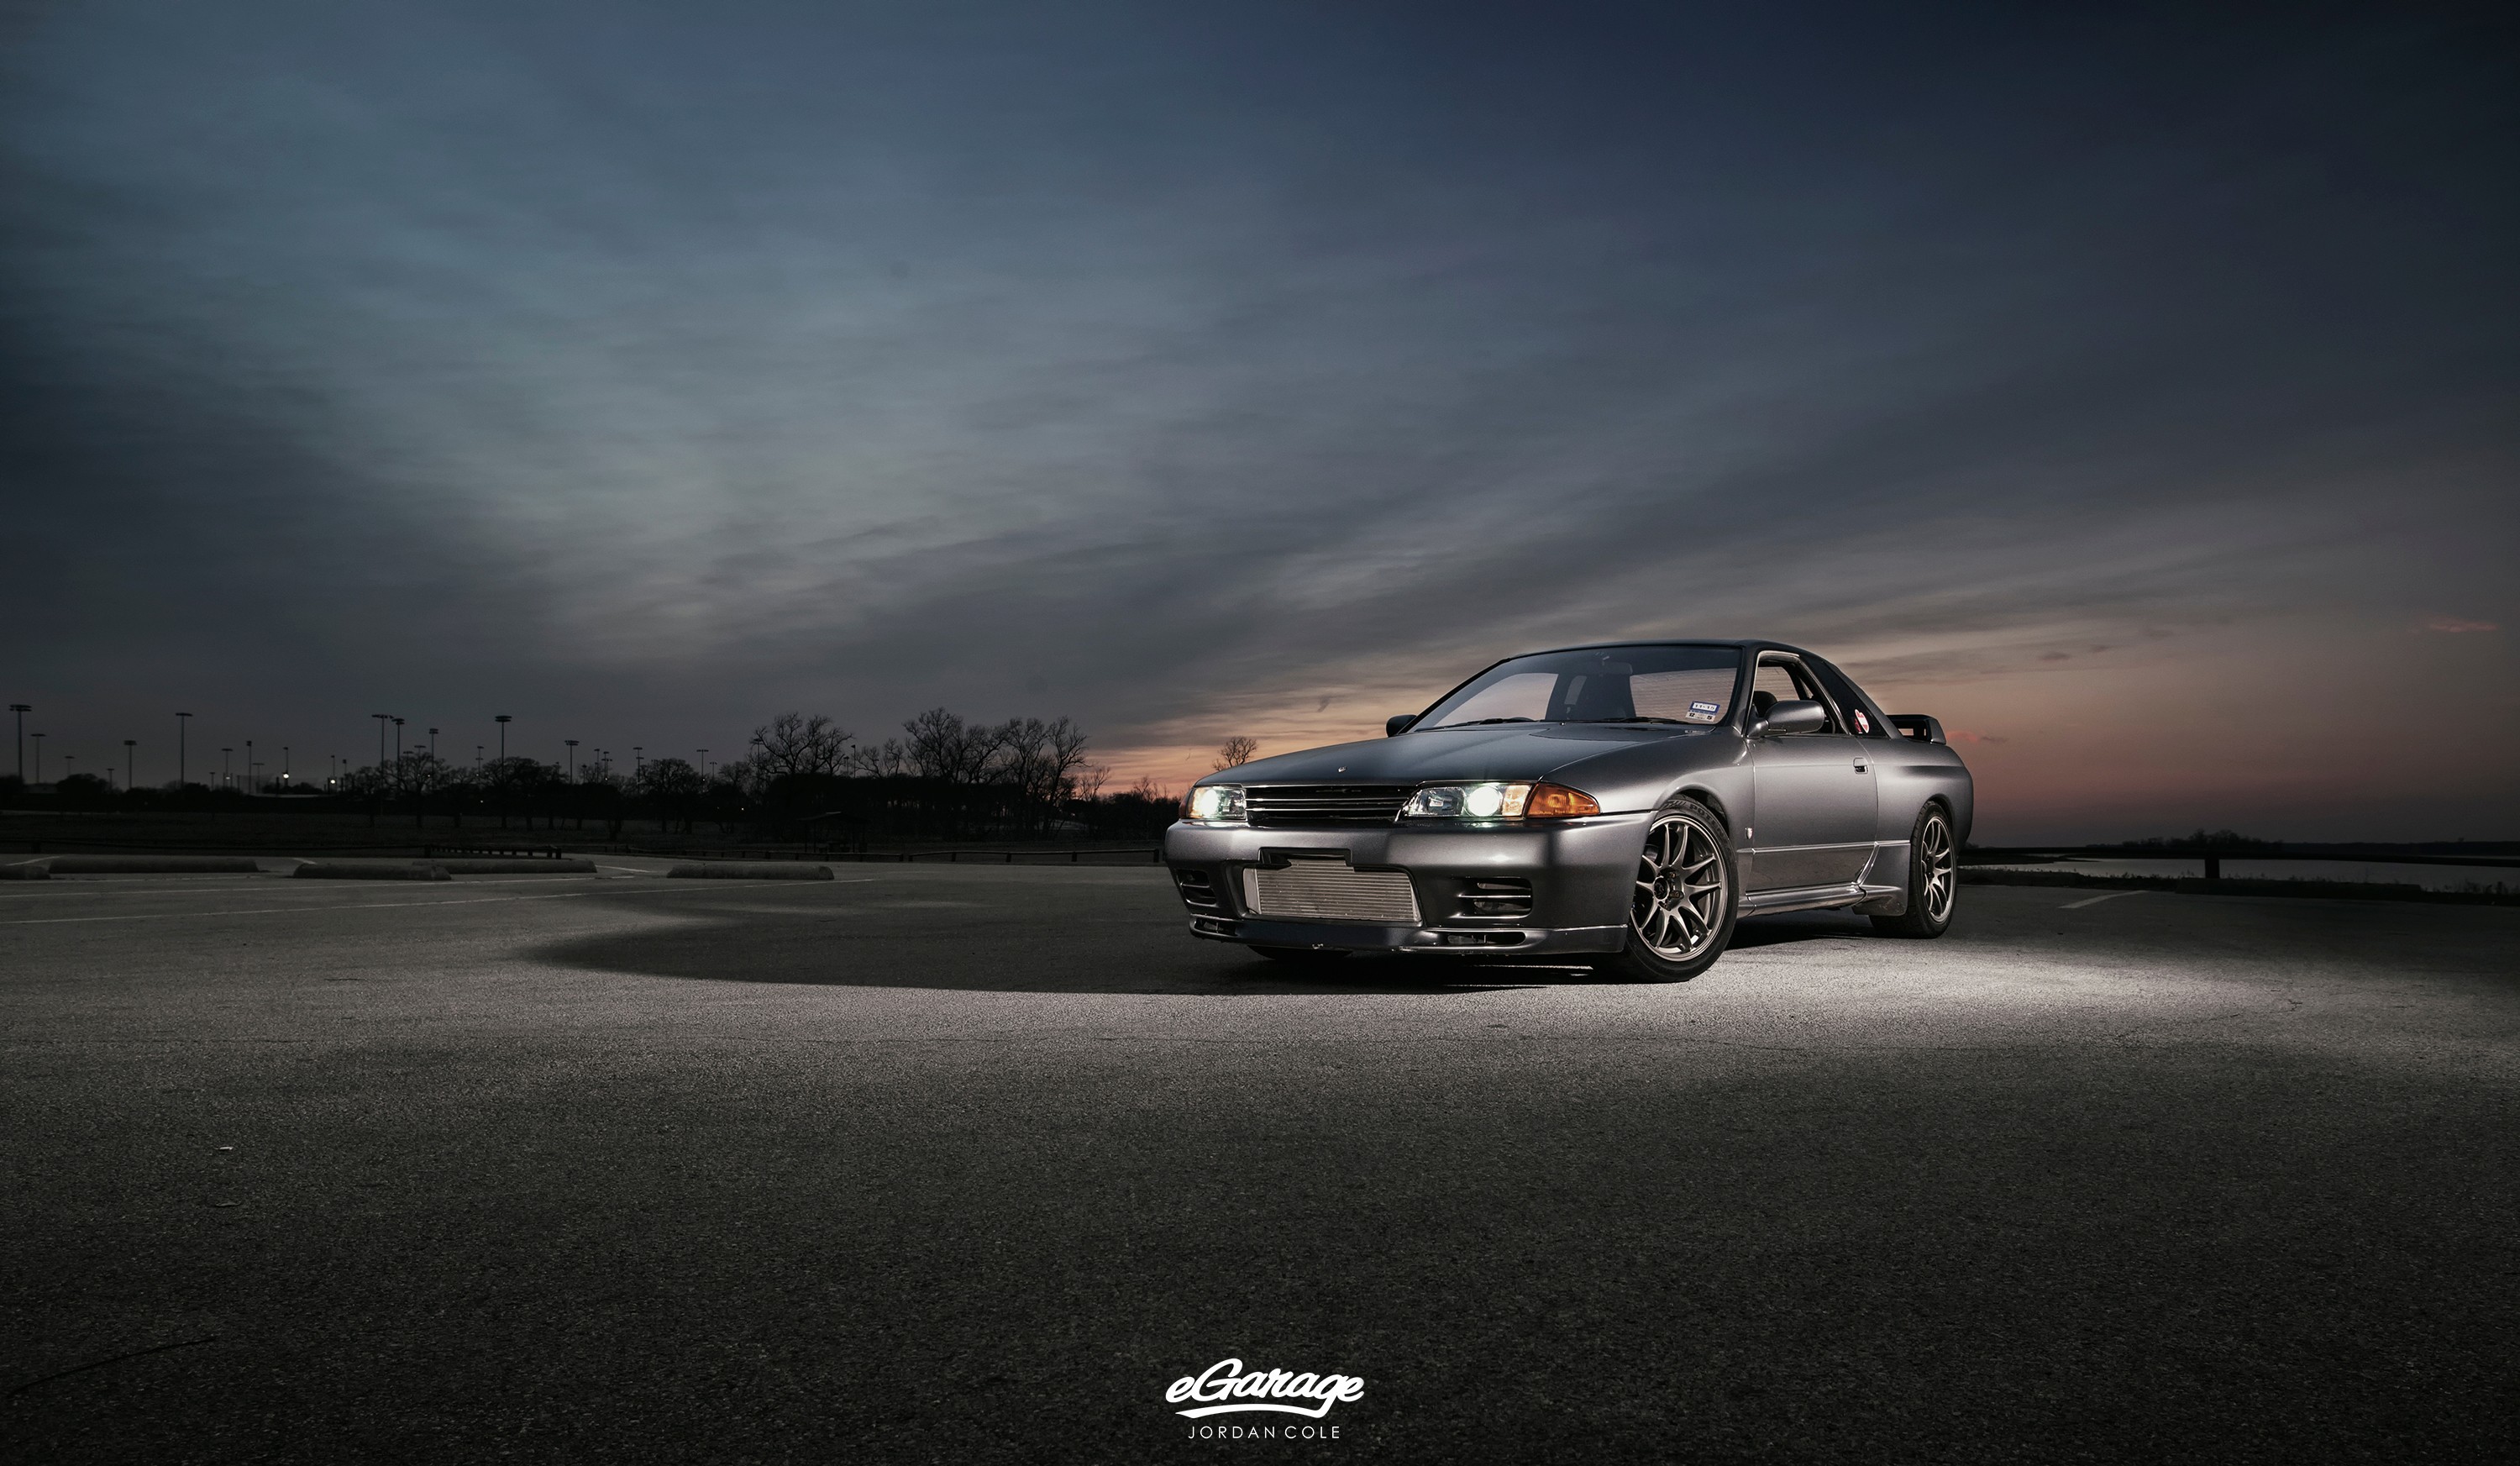 General 3000x1745 car vehicle Nissan black cars Nissan Skyline Japanese cars clouds frontal view headlights sky watermarked